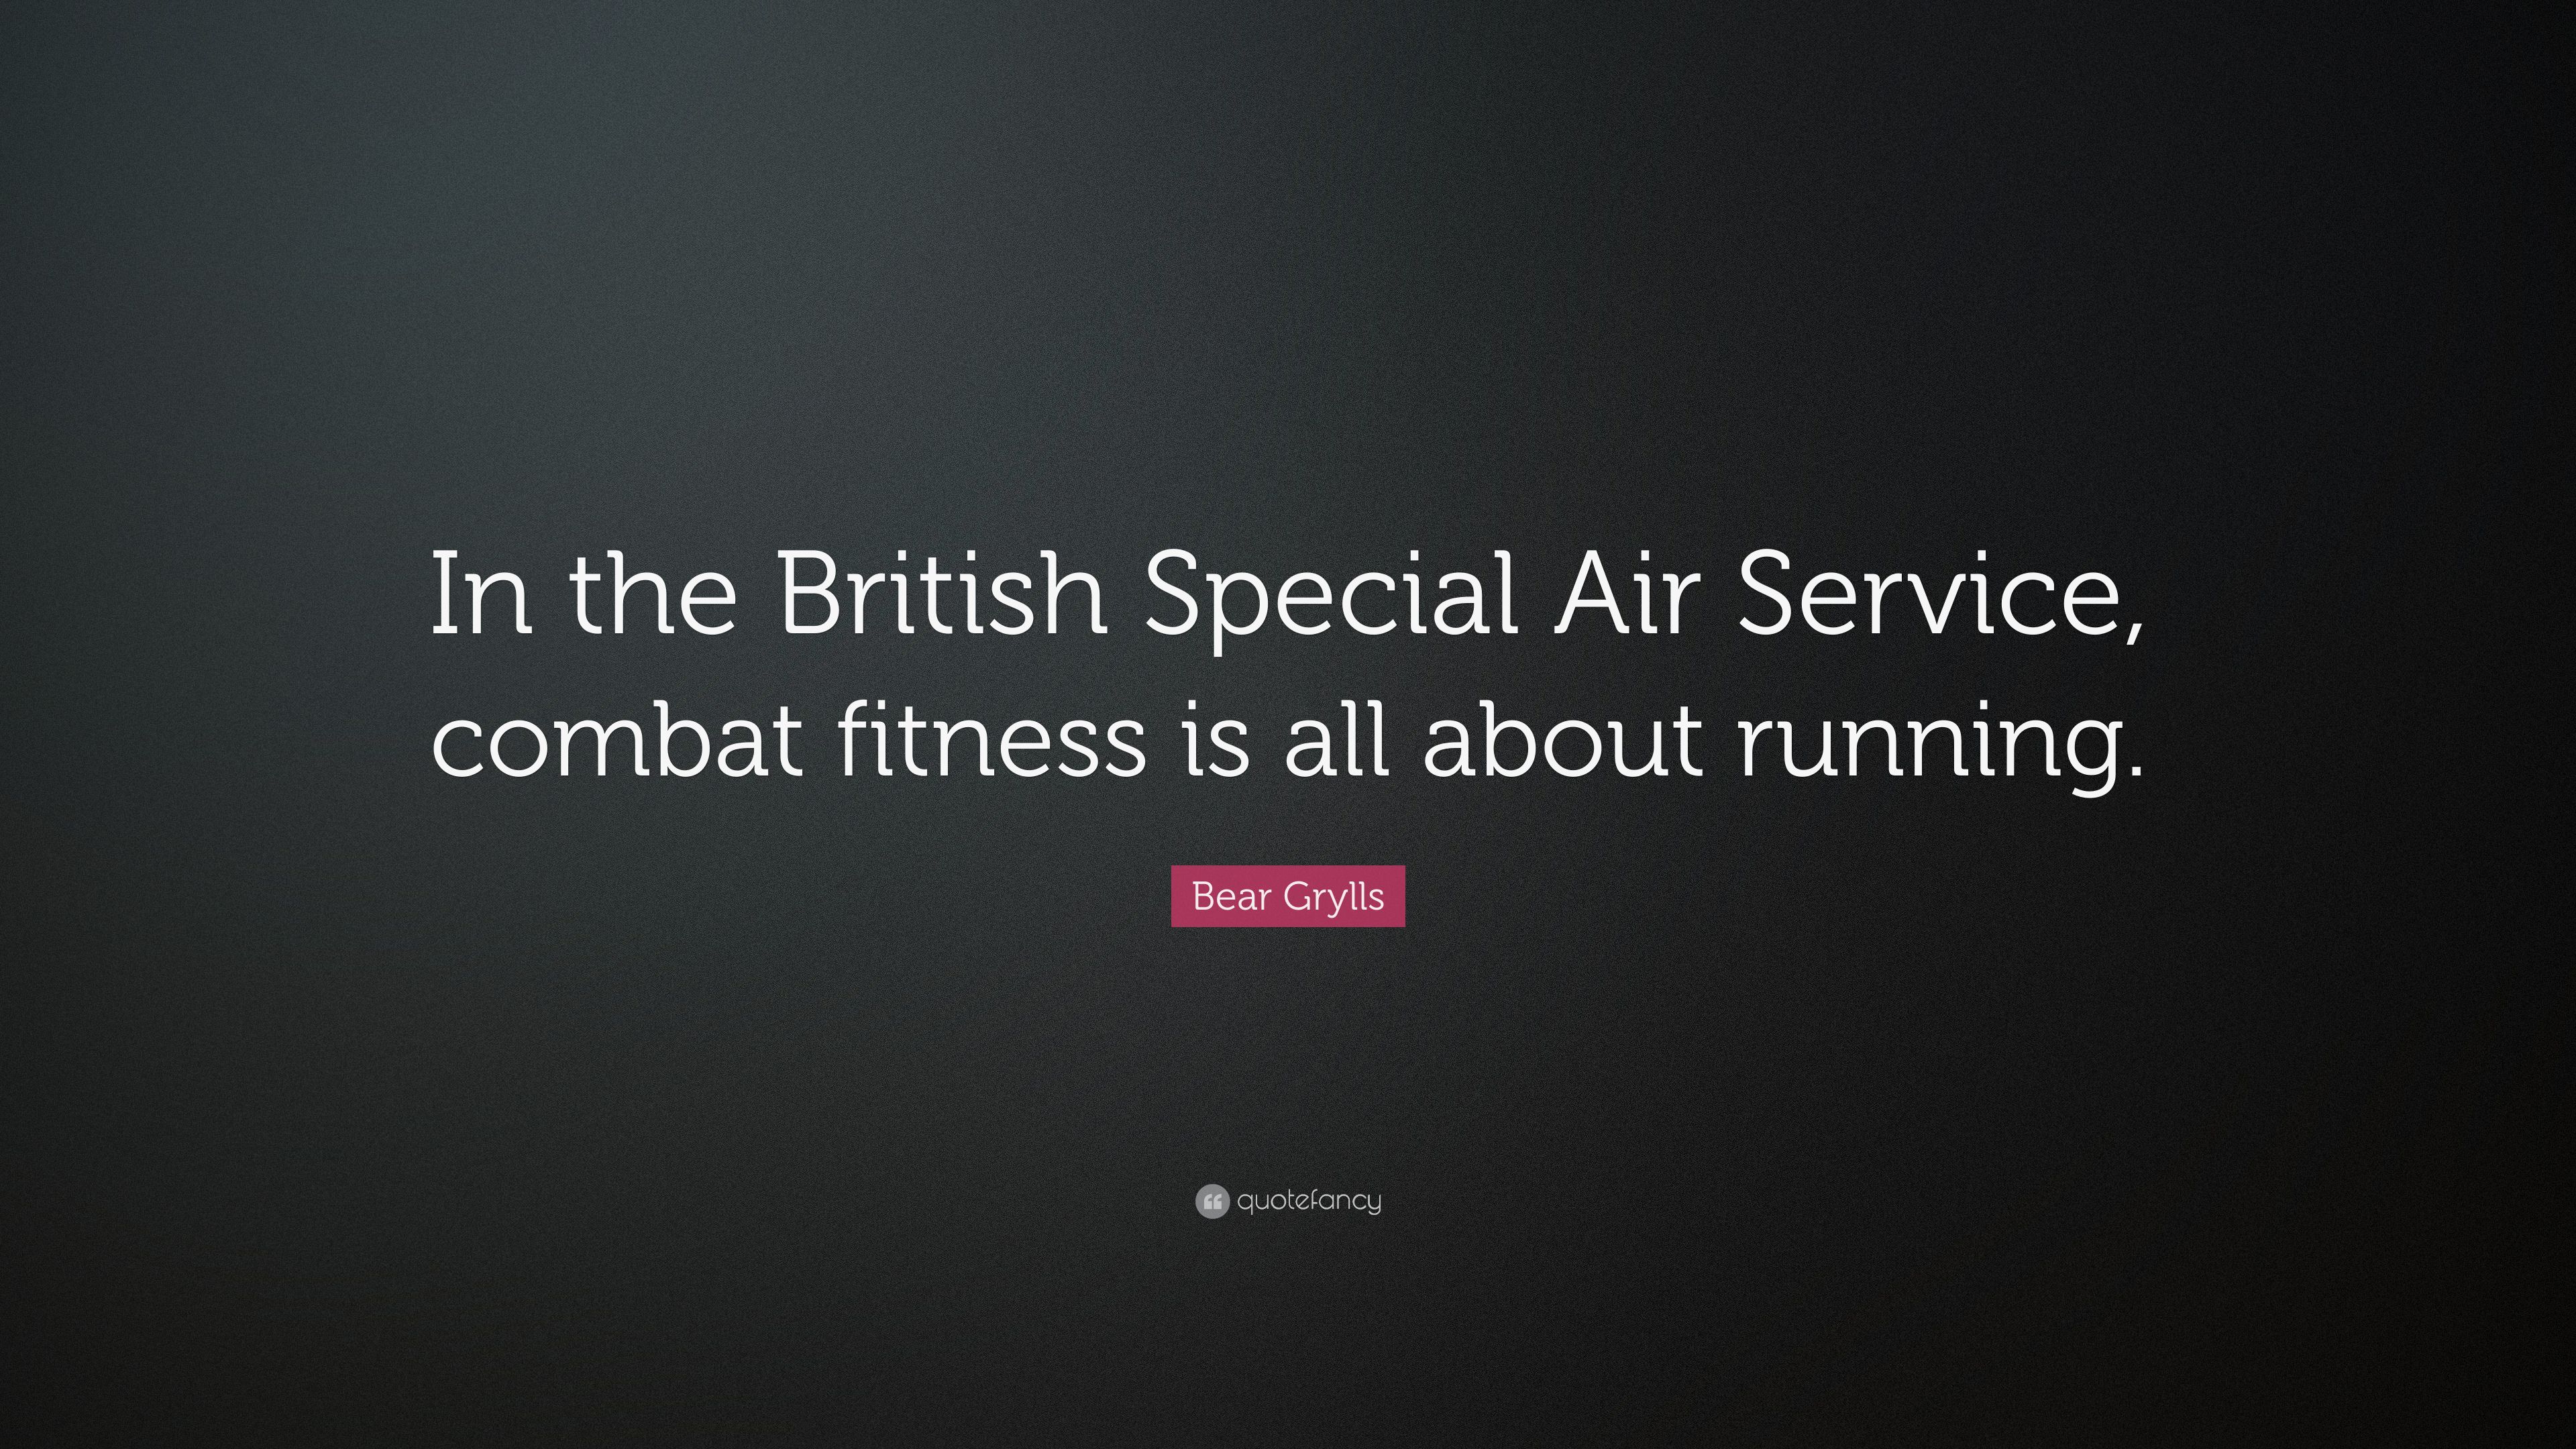 Bear Grylls Quote: “In the British Special Air Service, combat